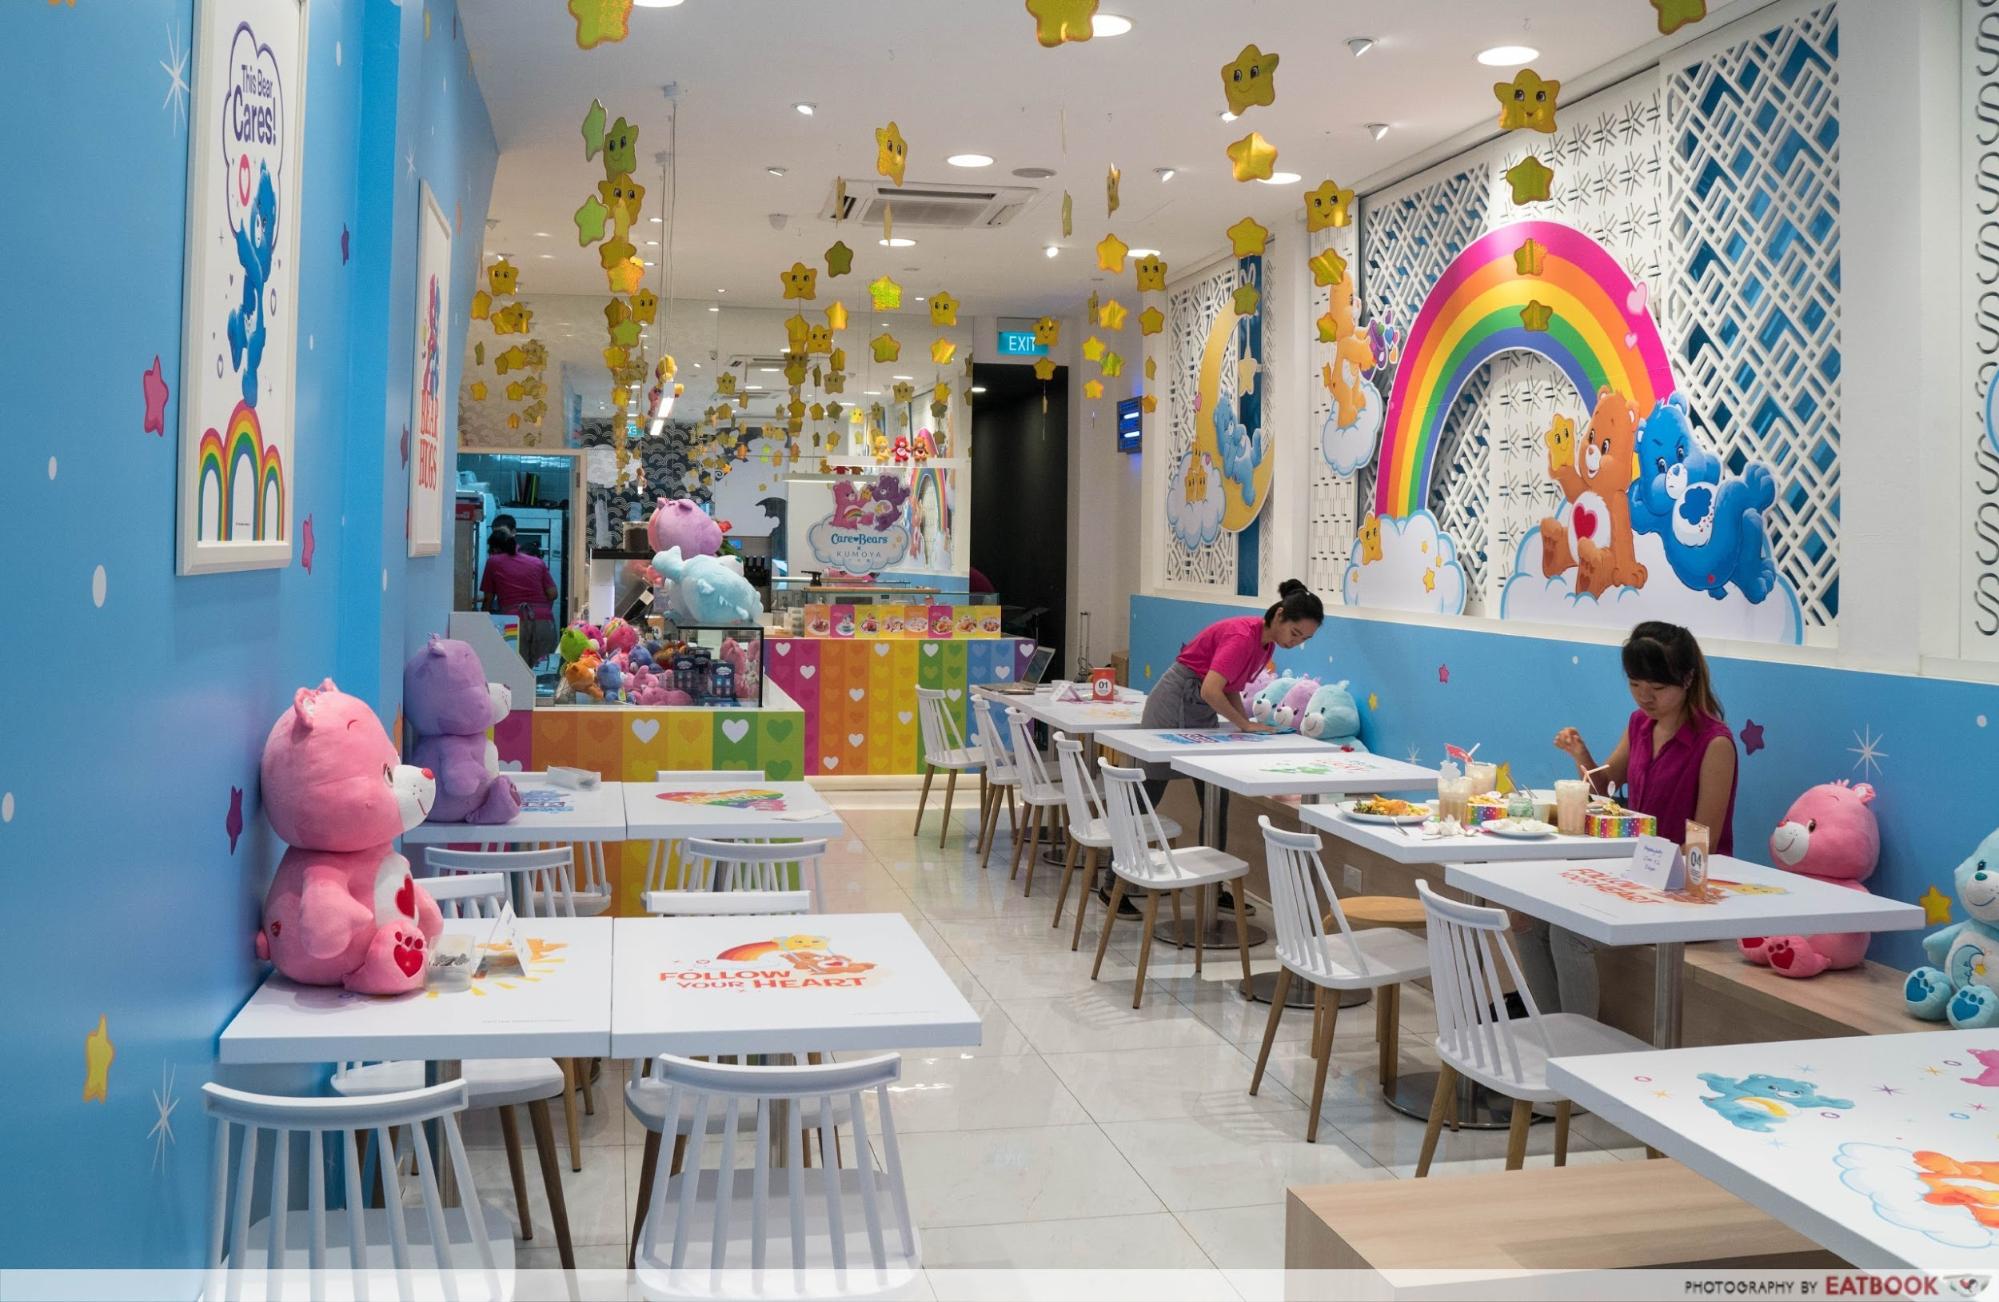 Feb 2018 cafes and restaurants (4) - Care Bears Cafe interior